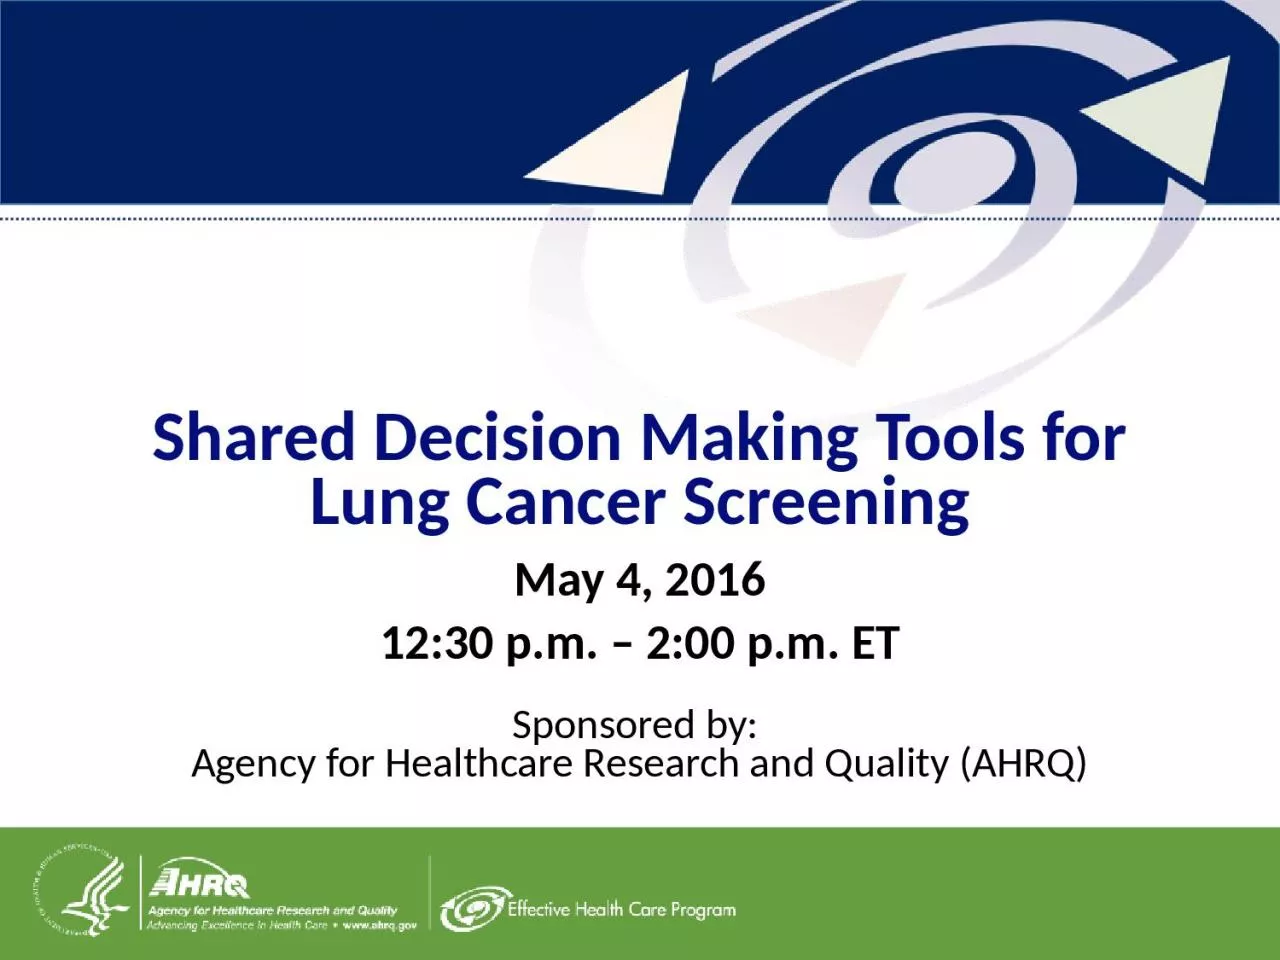 Shared Decision Making Tools for Lung Cancer Screening